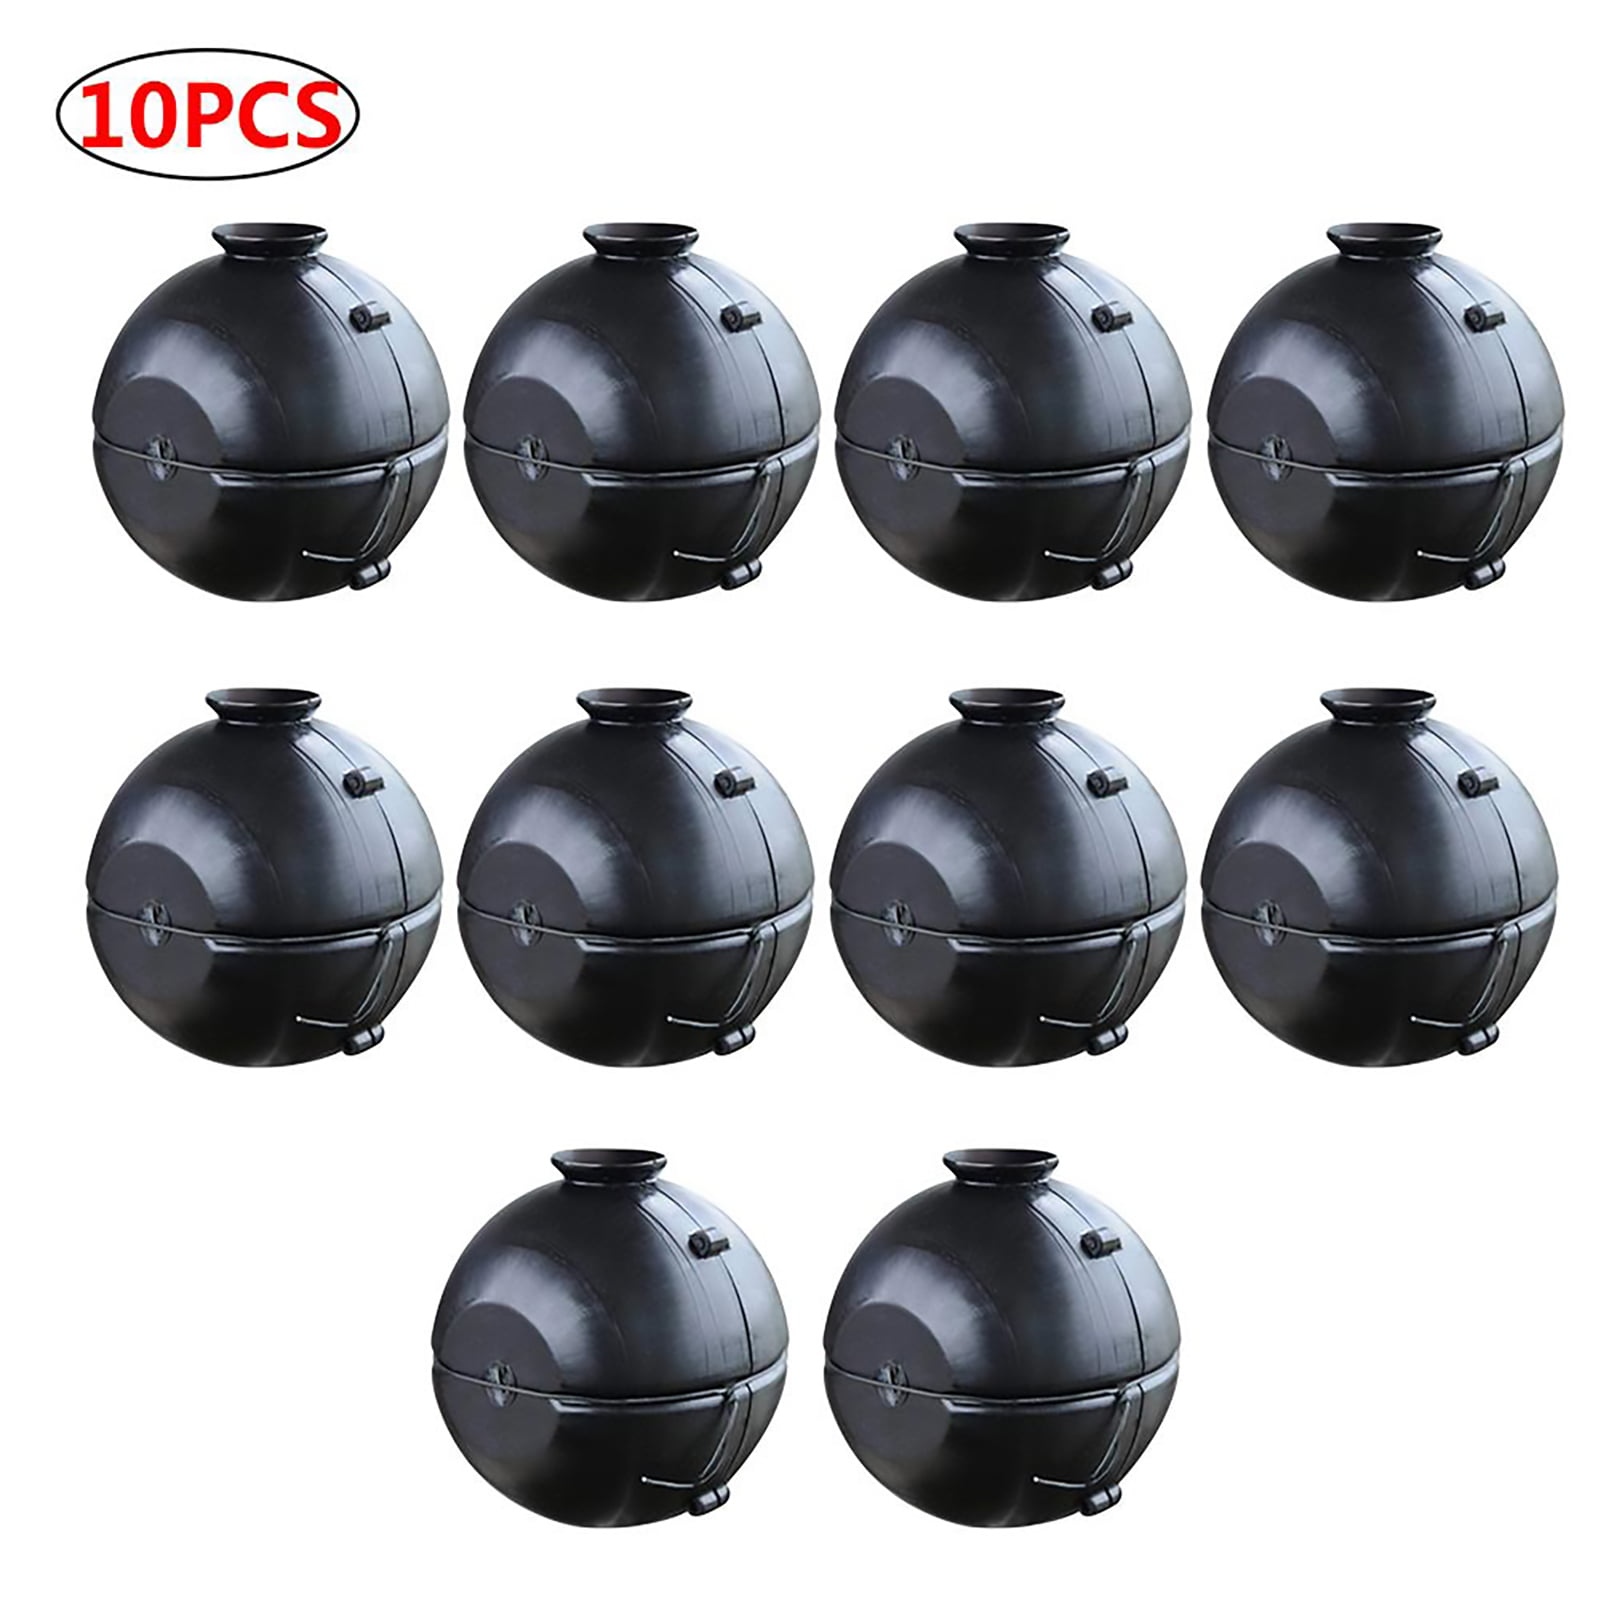 Details about   10Pcs Plant Root Grow Graft Boxes High Pressure Propagation Layering Pod Balls 